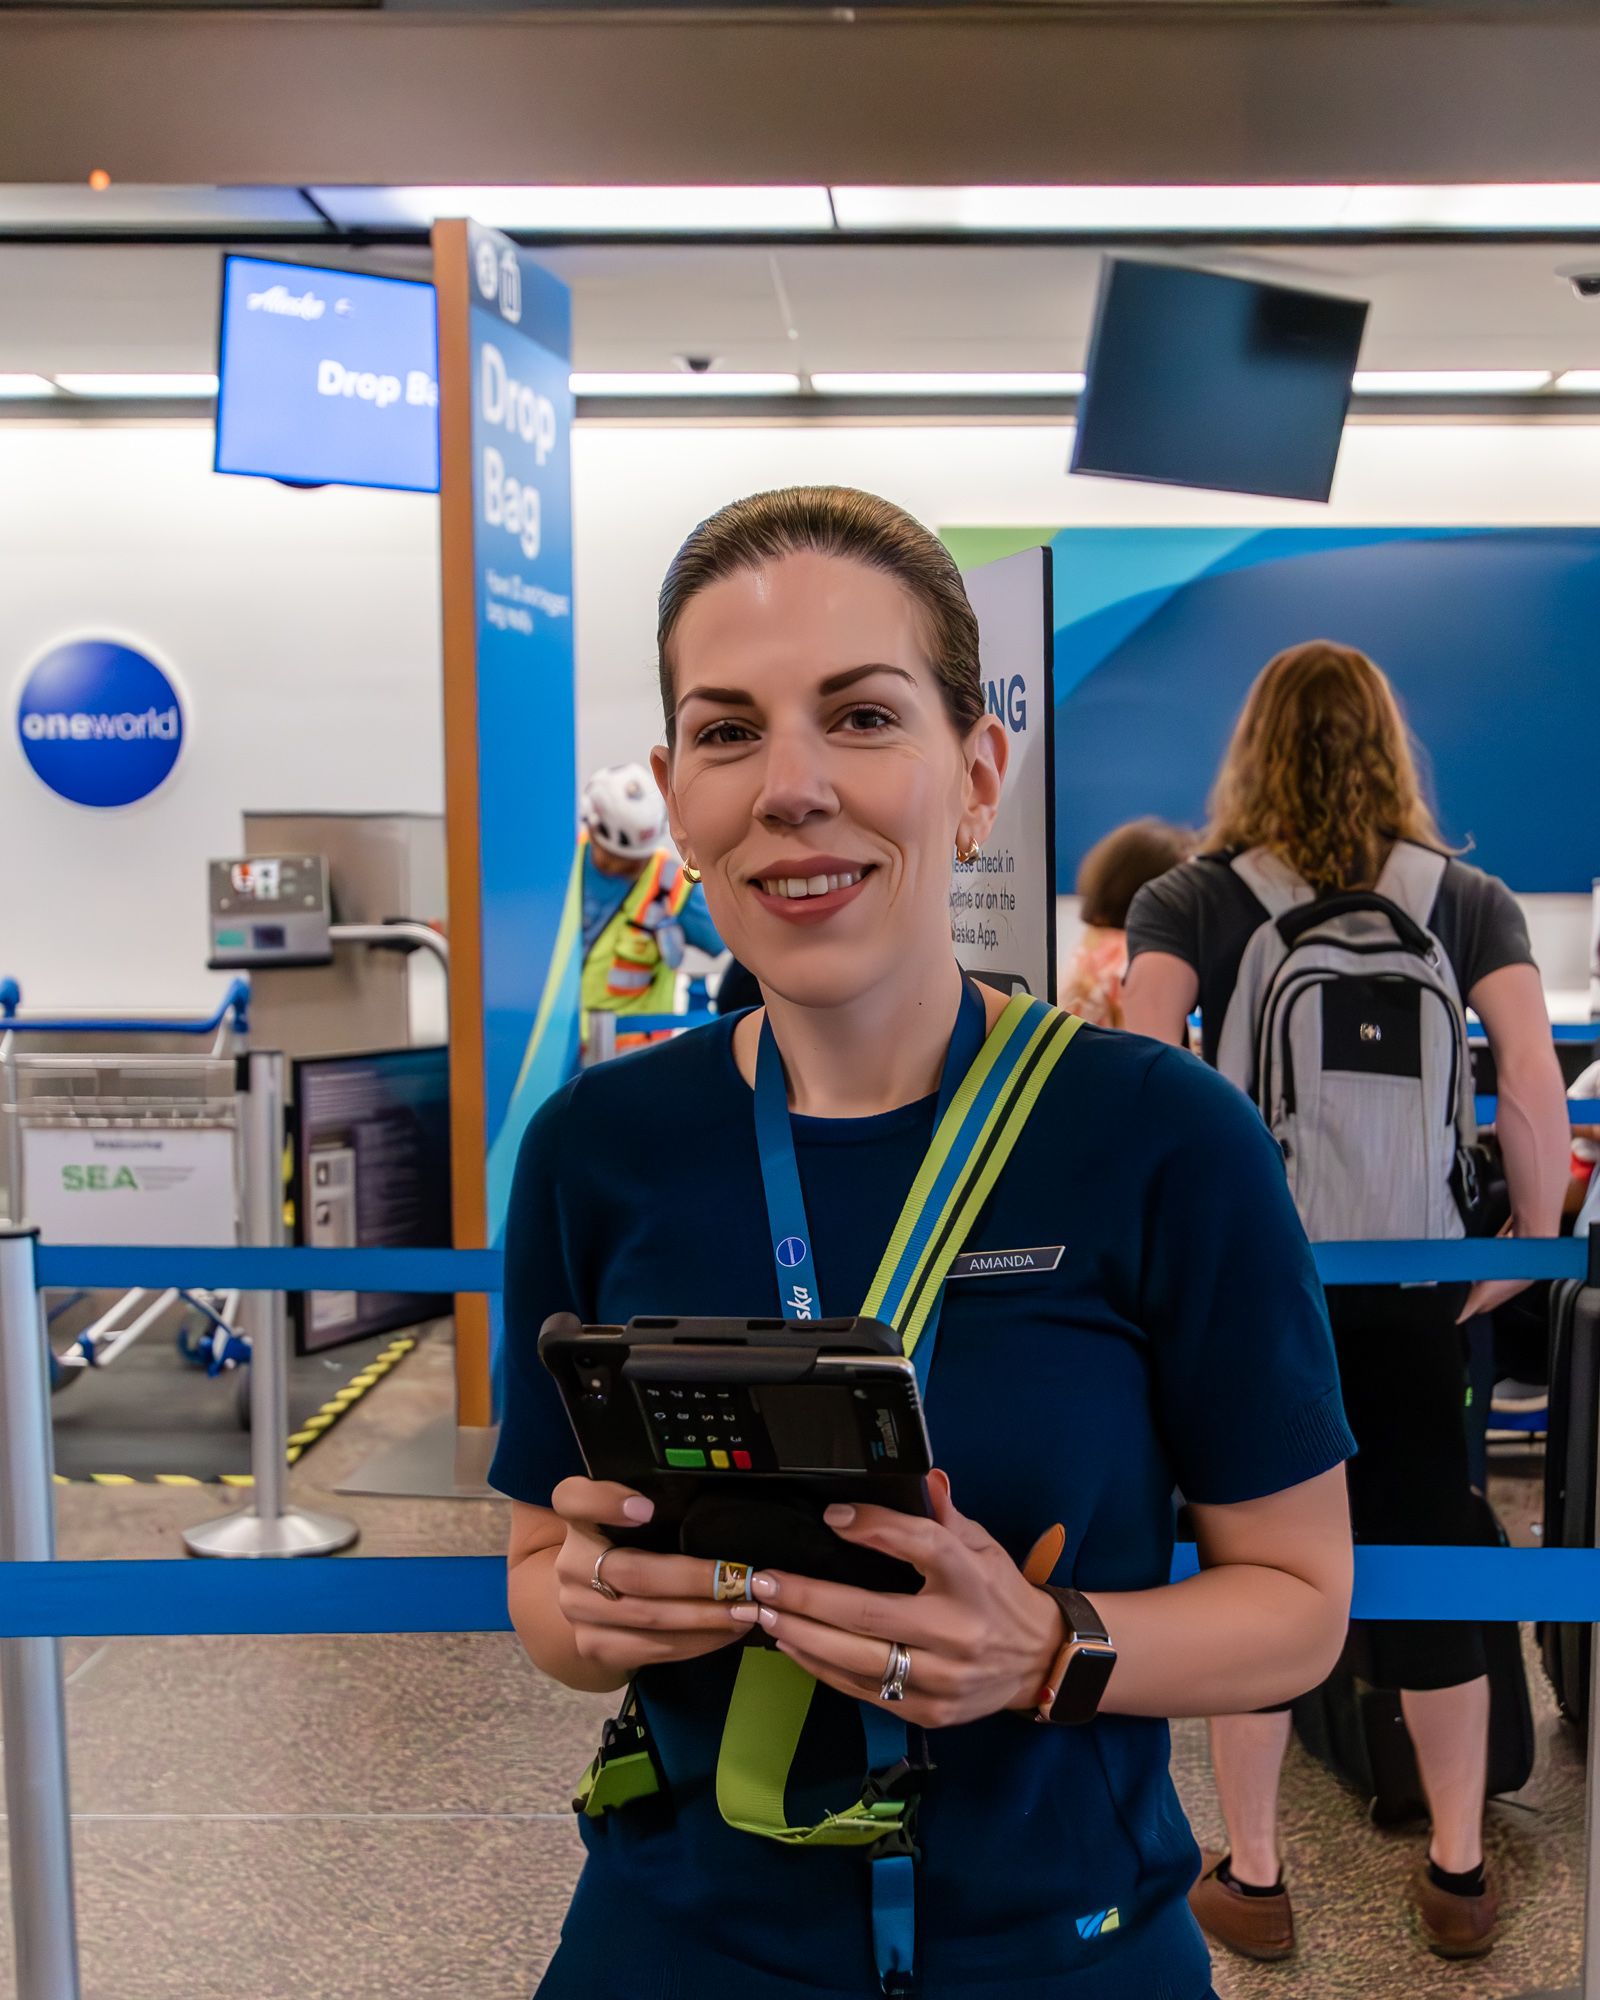 Amanda, An Alaska Airlines Customer Service Agent at SEA, With Her Tablet